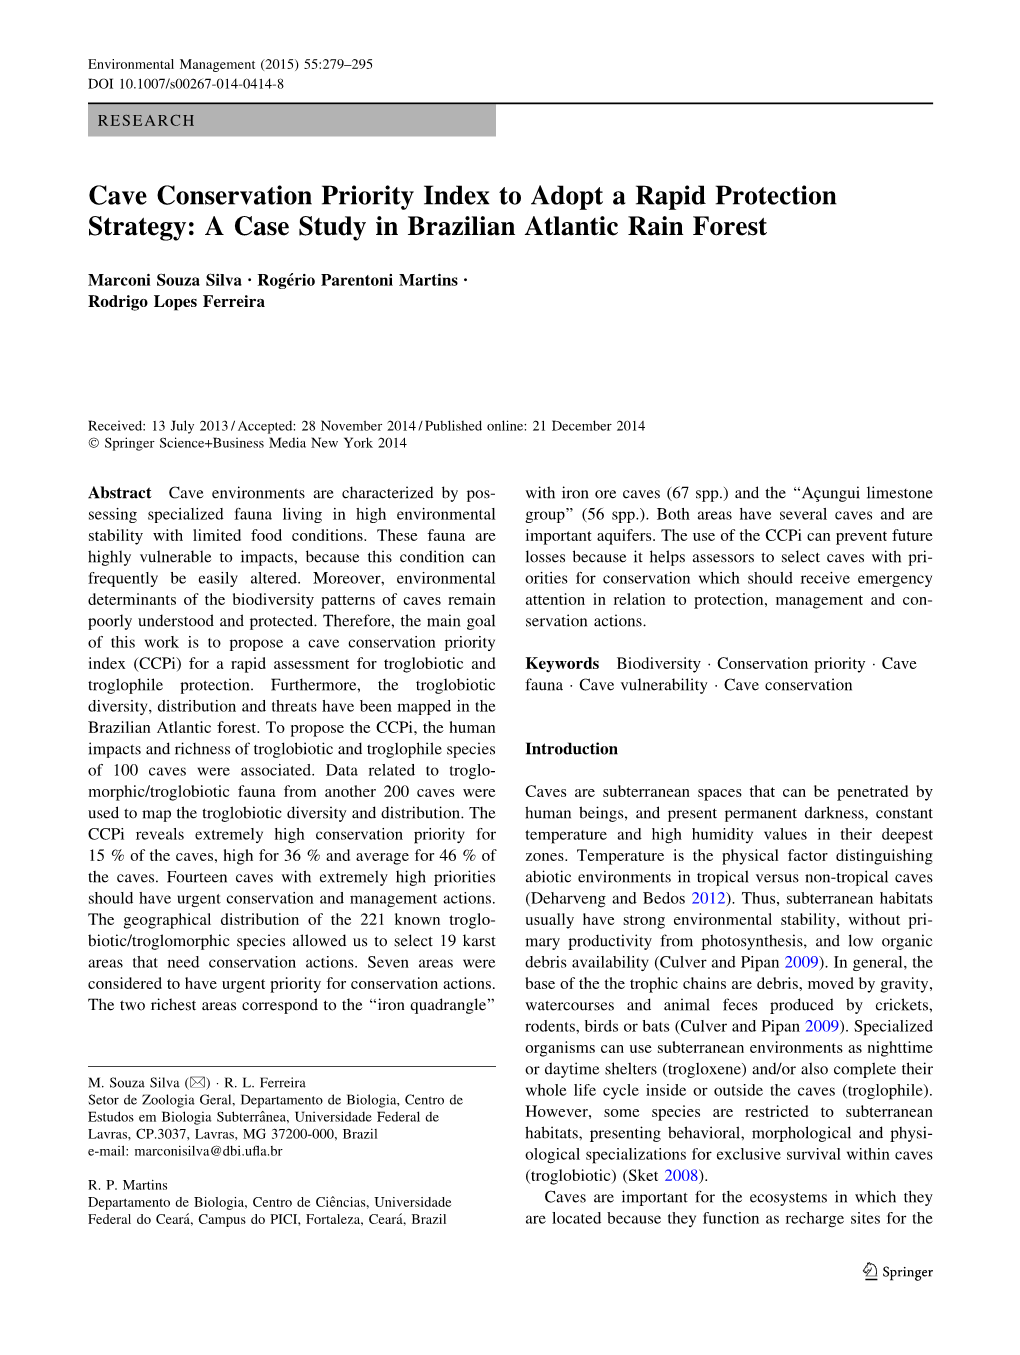 Cave Conservation Priority Index to Adopt a Rapid Protection Strategy: a Case Study in Brazilian Atlantic Rain Forest